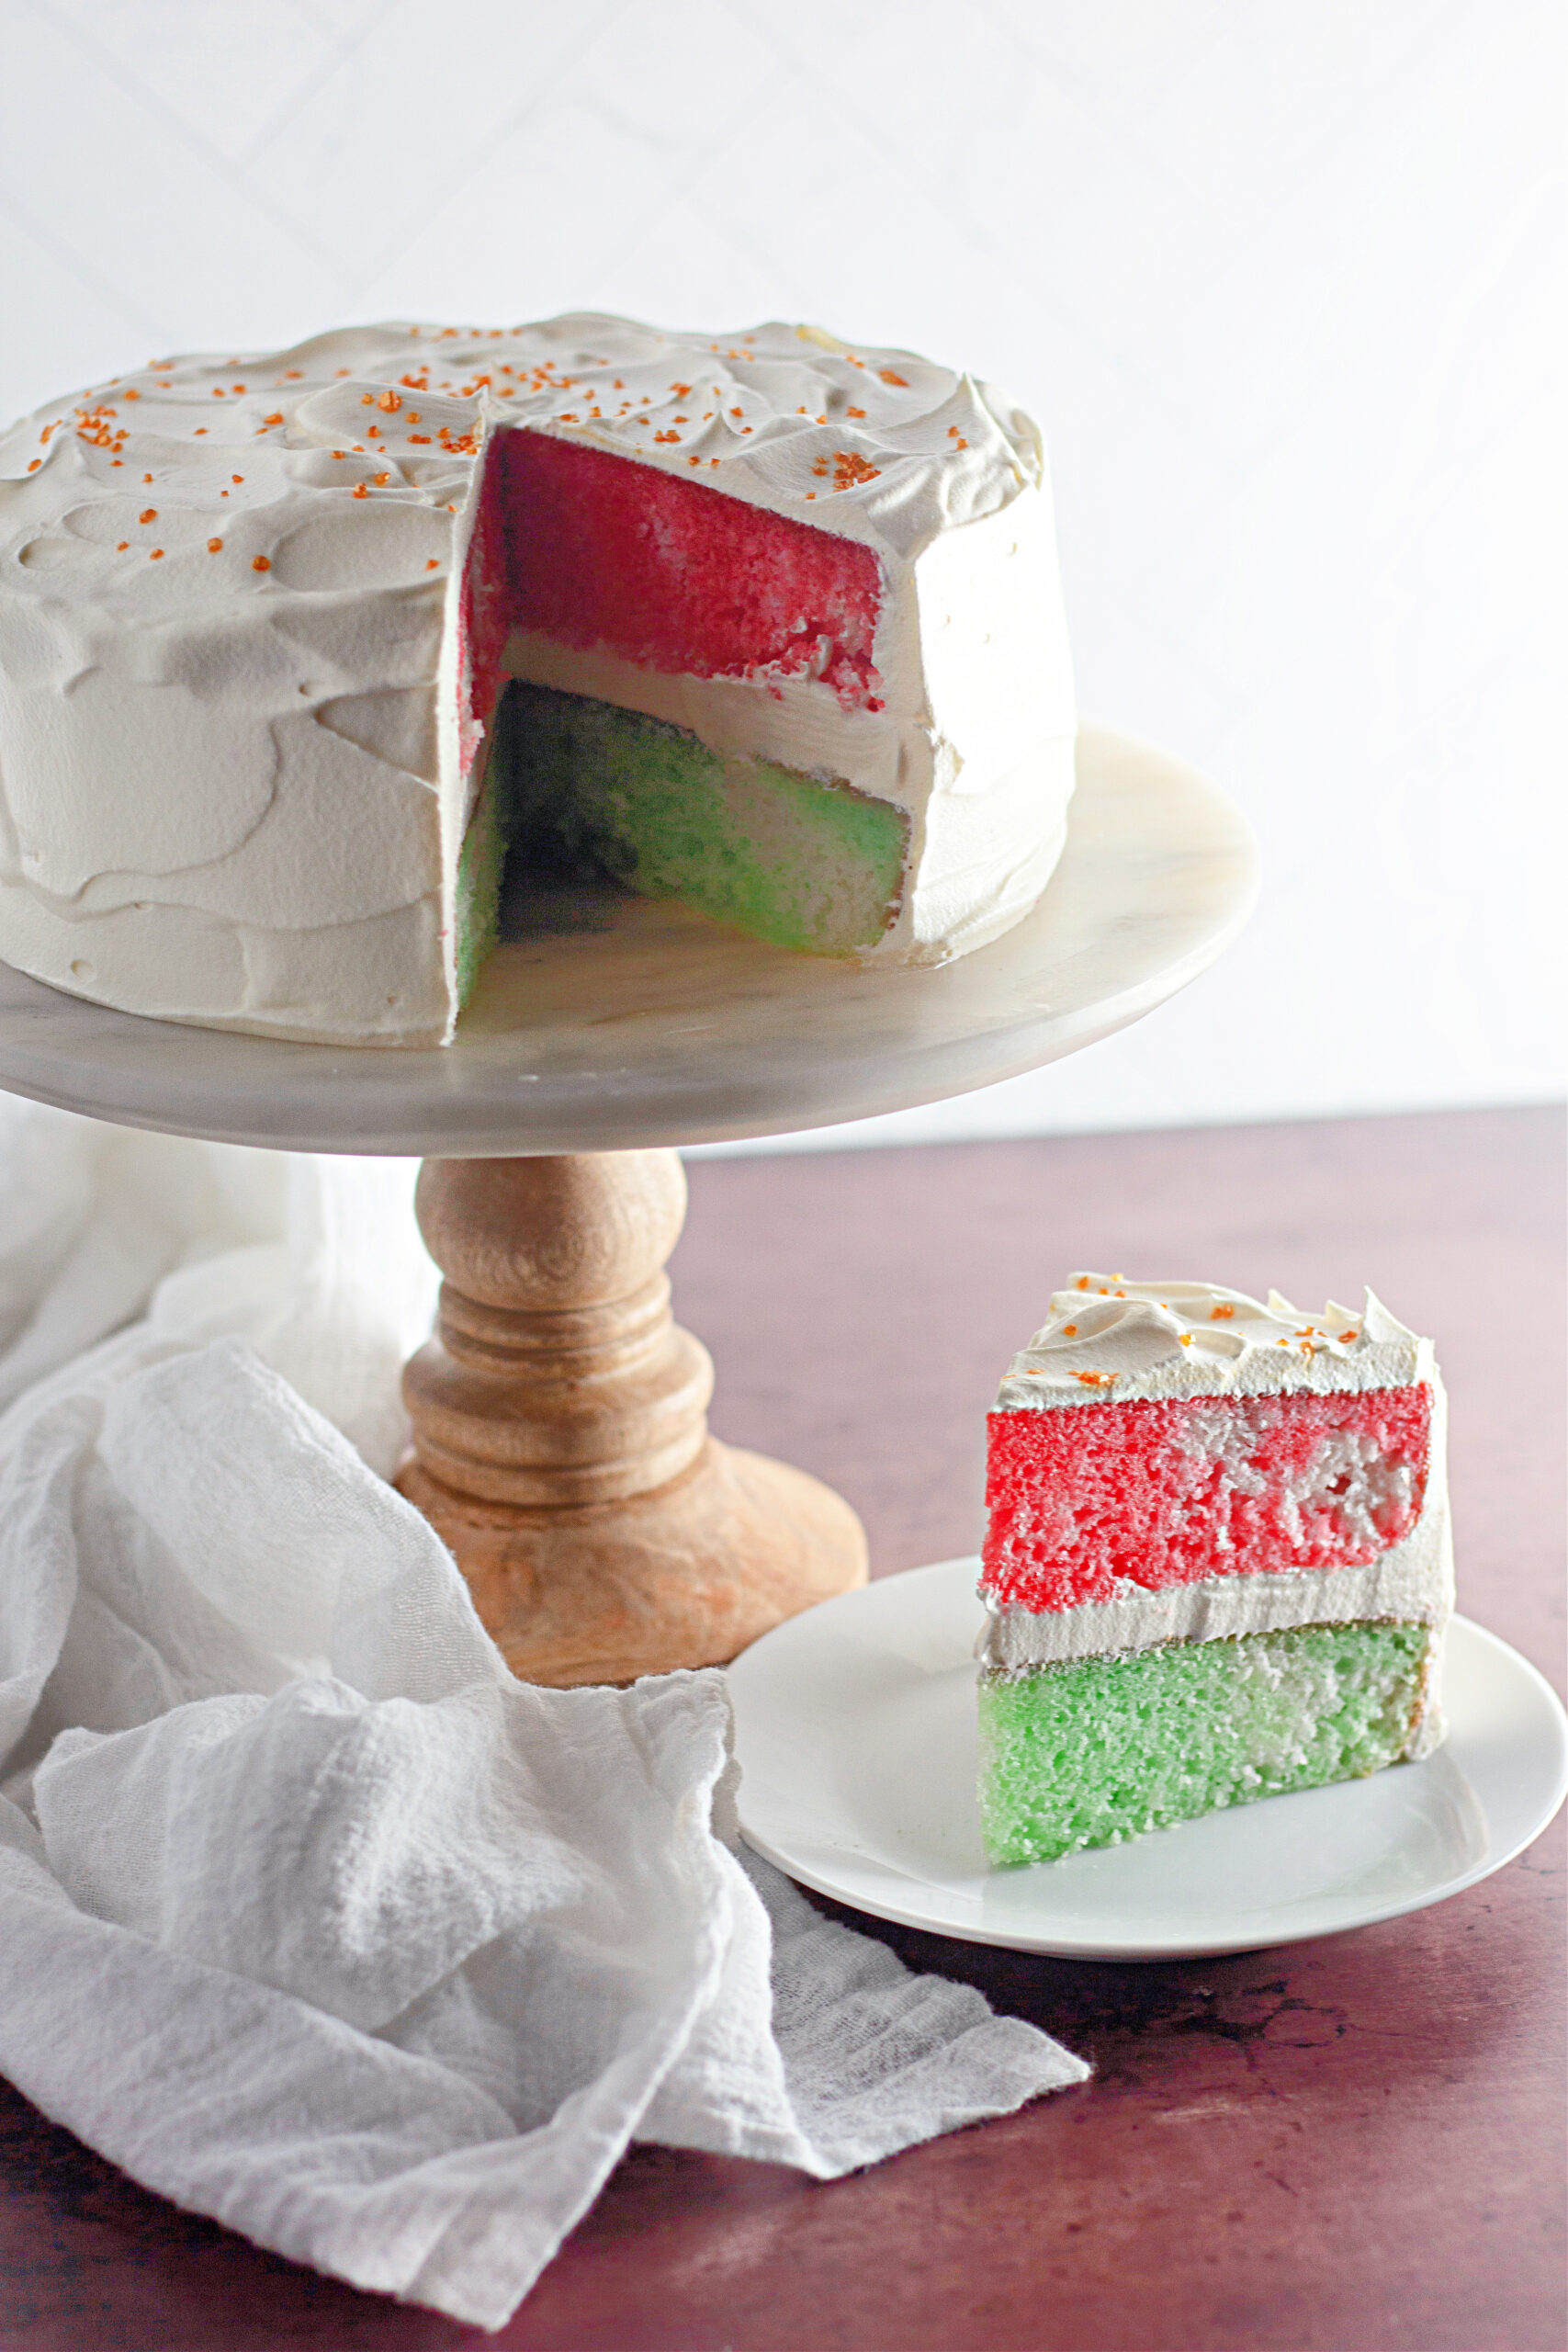 Christmas Jello cake on cake stand with slice in front